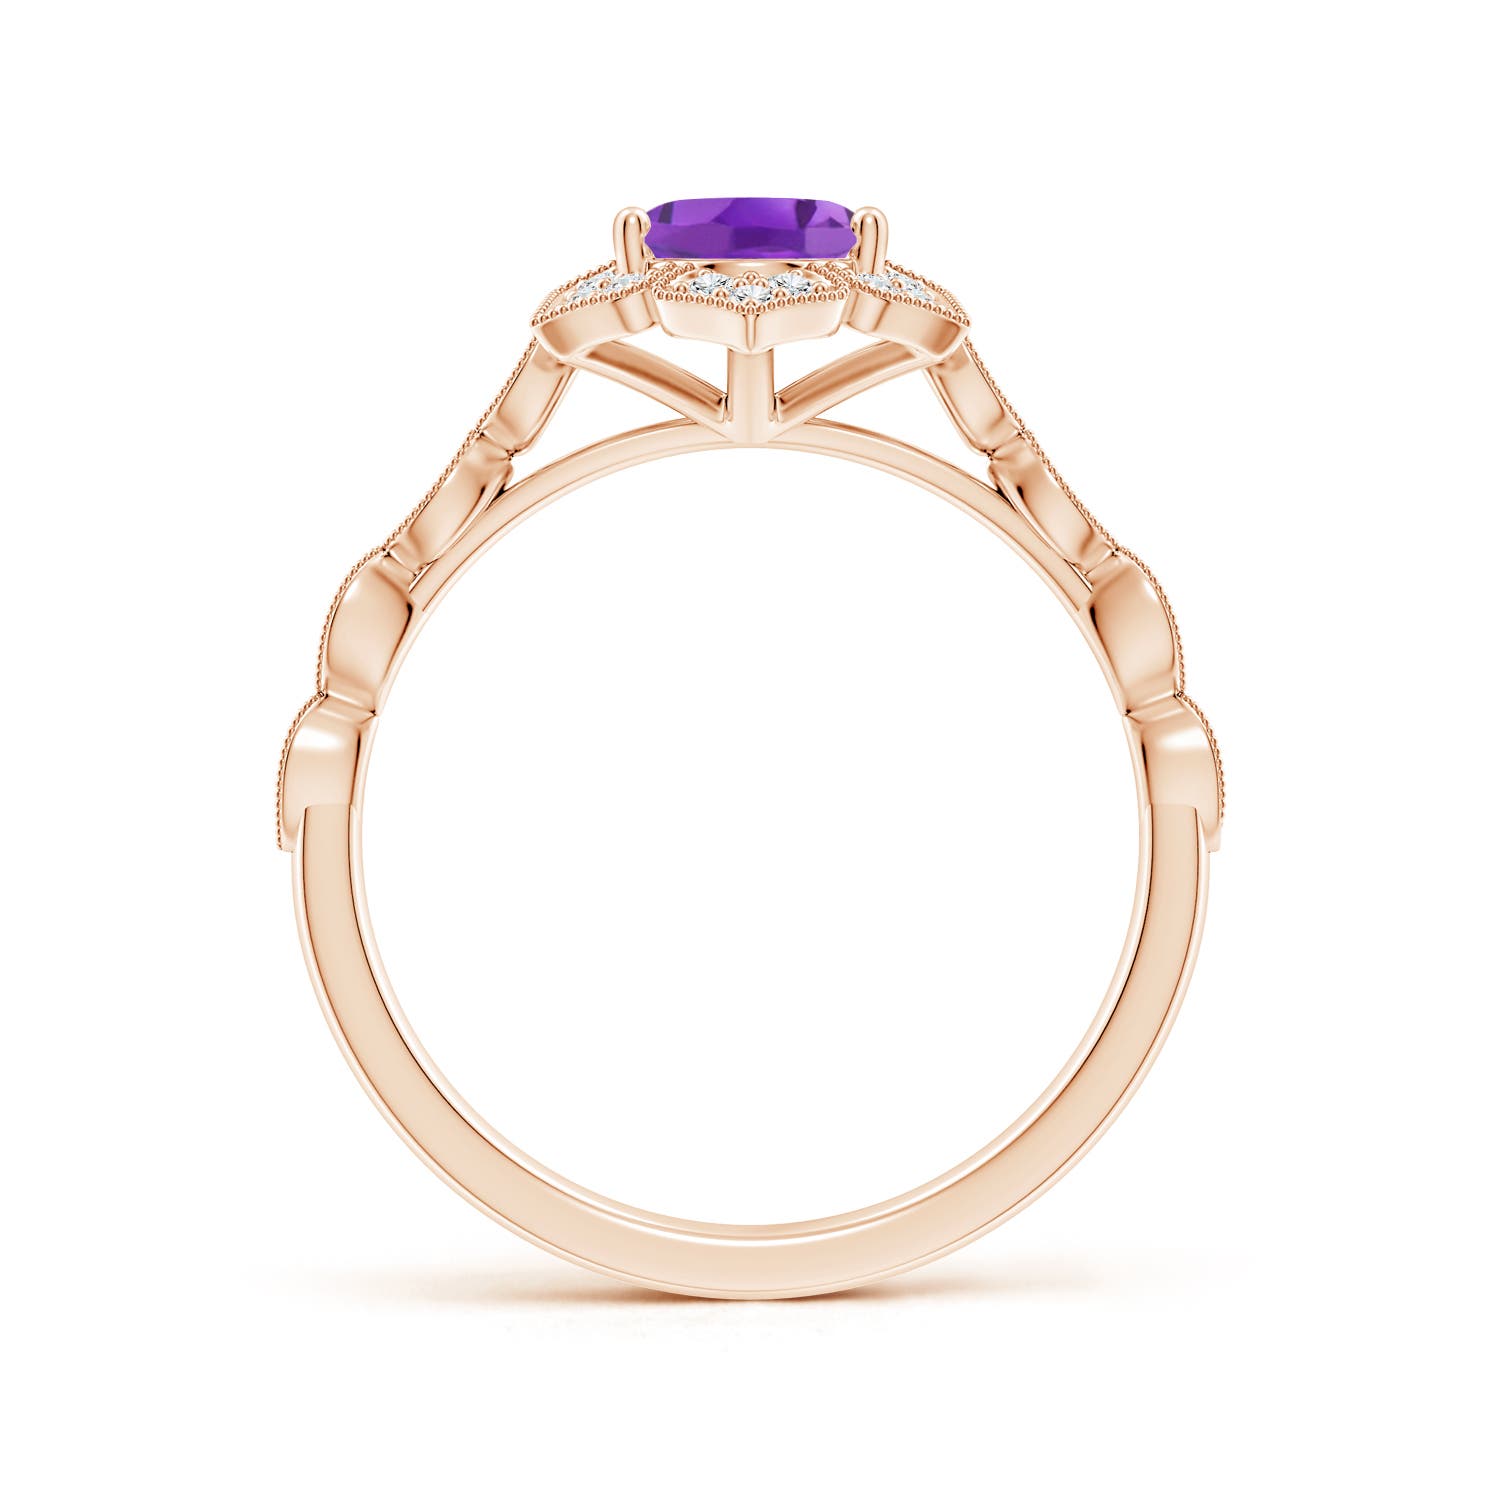 AA - Amethyst / 1.33 CT / 14 KT Rose Gold